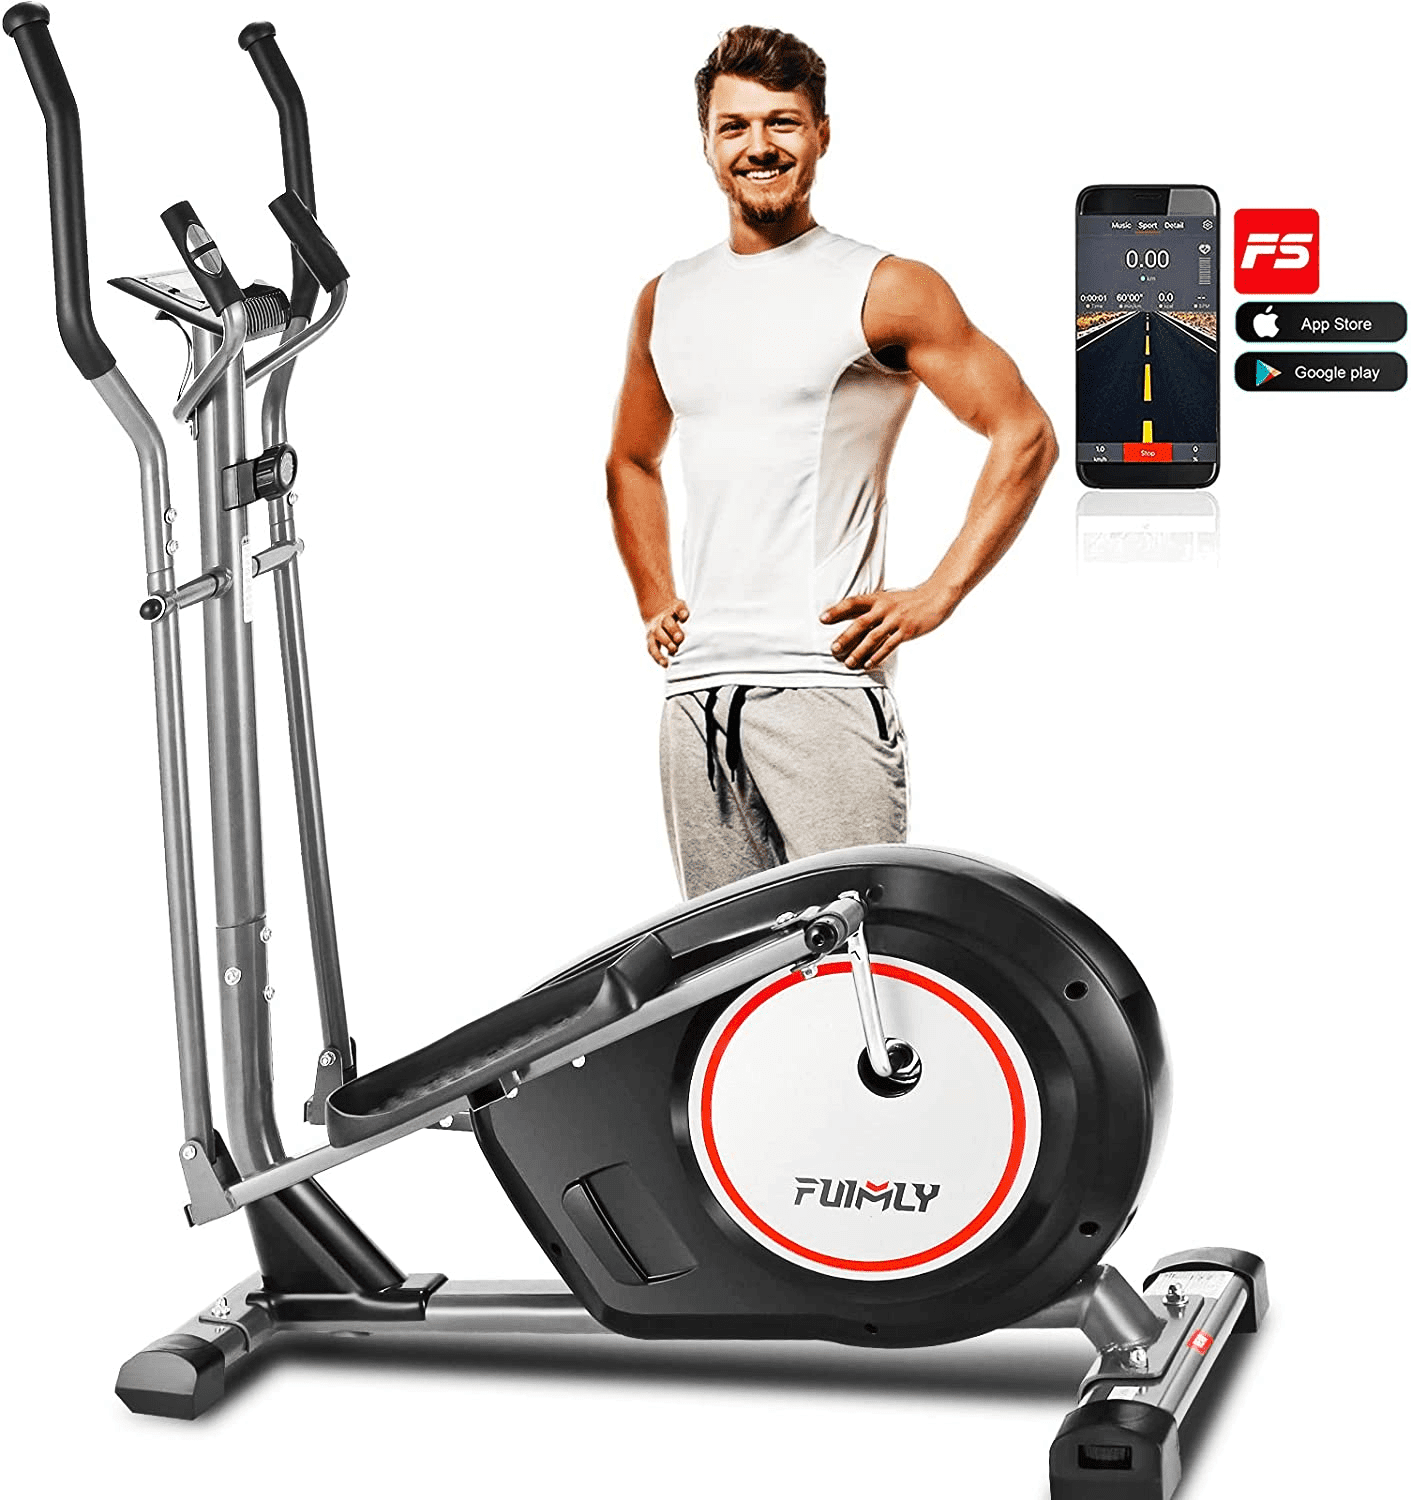 390LB Weight Capacity Exercise Fitness Elliptical Trainer Heart Rate Sensor FUNMILY Elliptical Machine for Home Use Cardio Cross Trainer with 10-Level Magnetic Resistance LCD Monitor 